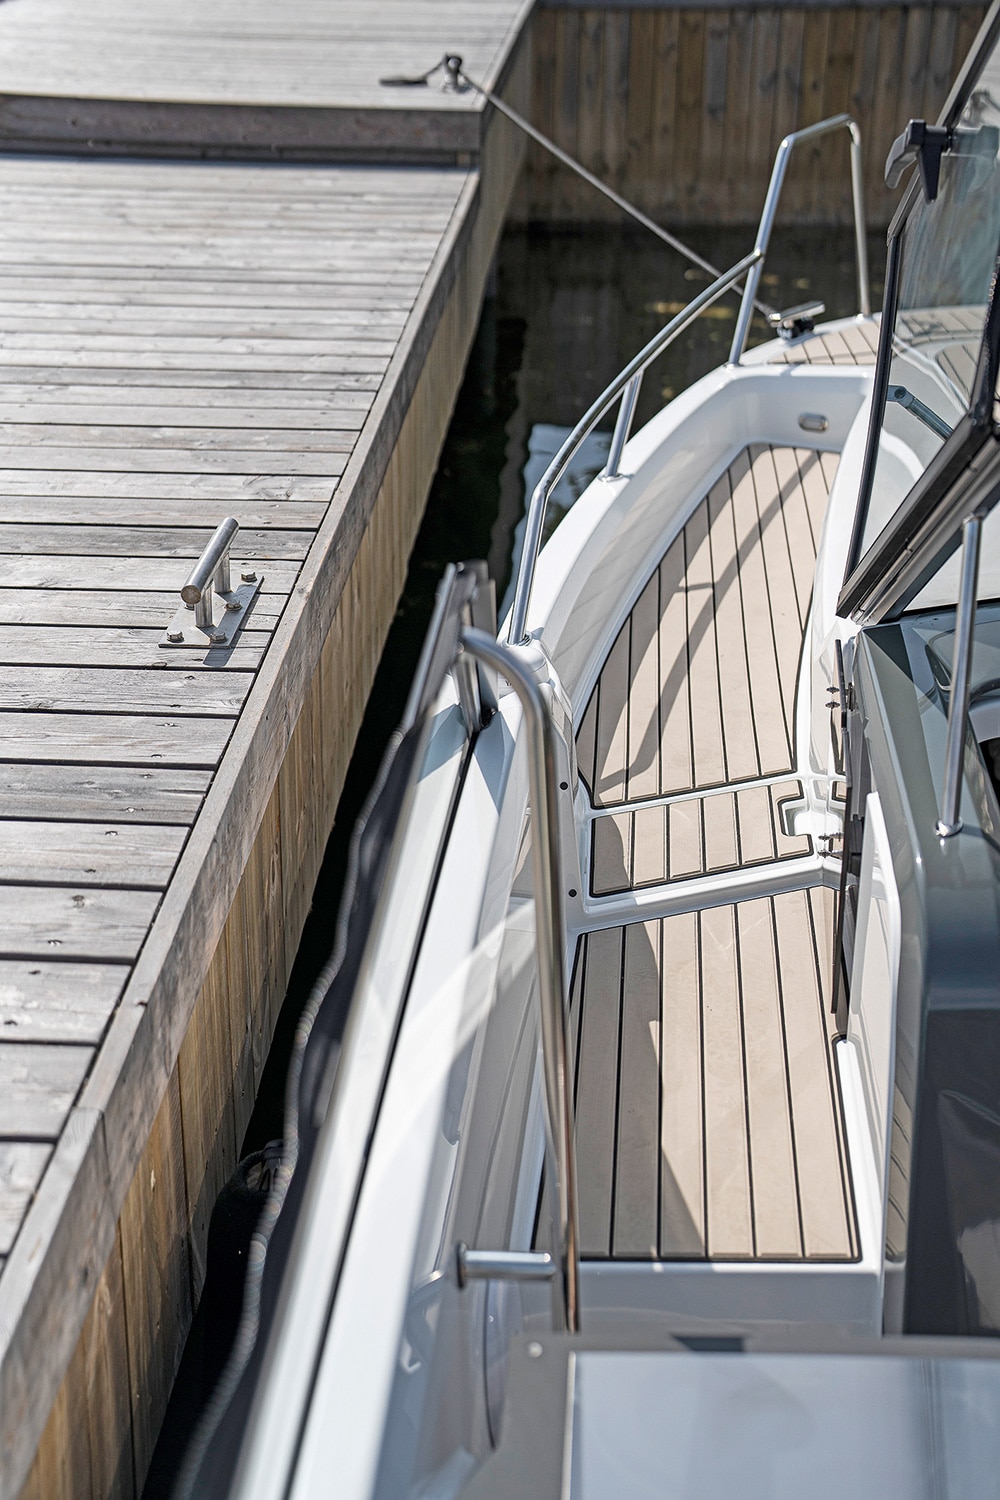 Yamarin 80 DC The recessed side deck makes forward deck access a lot easier.